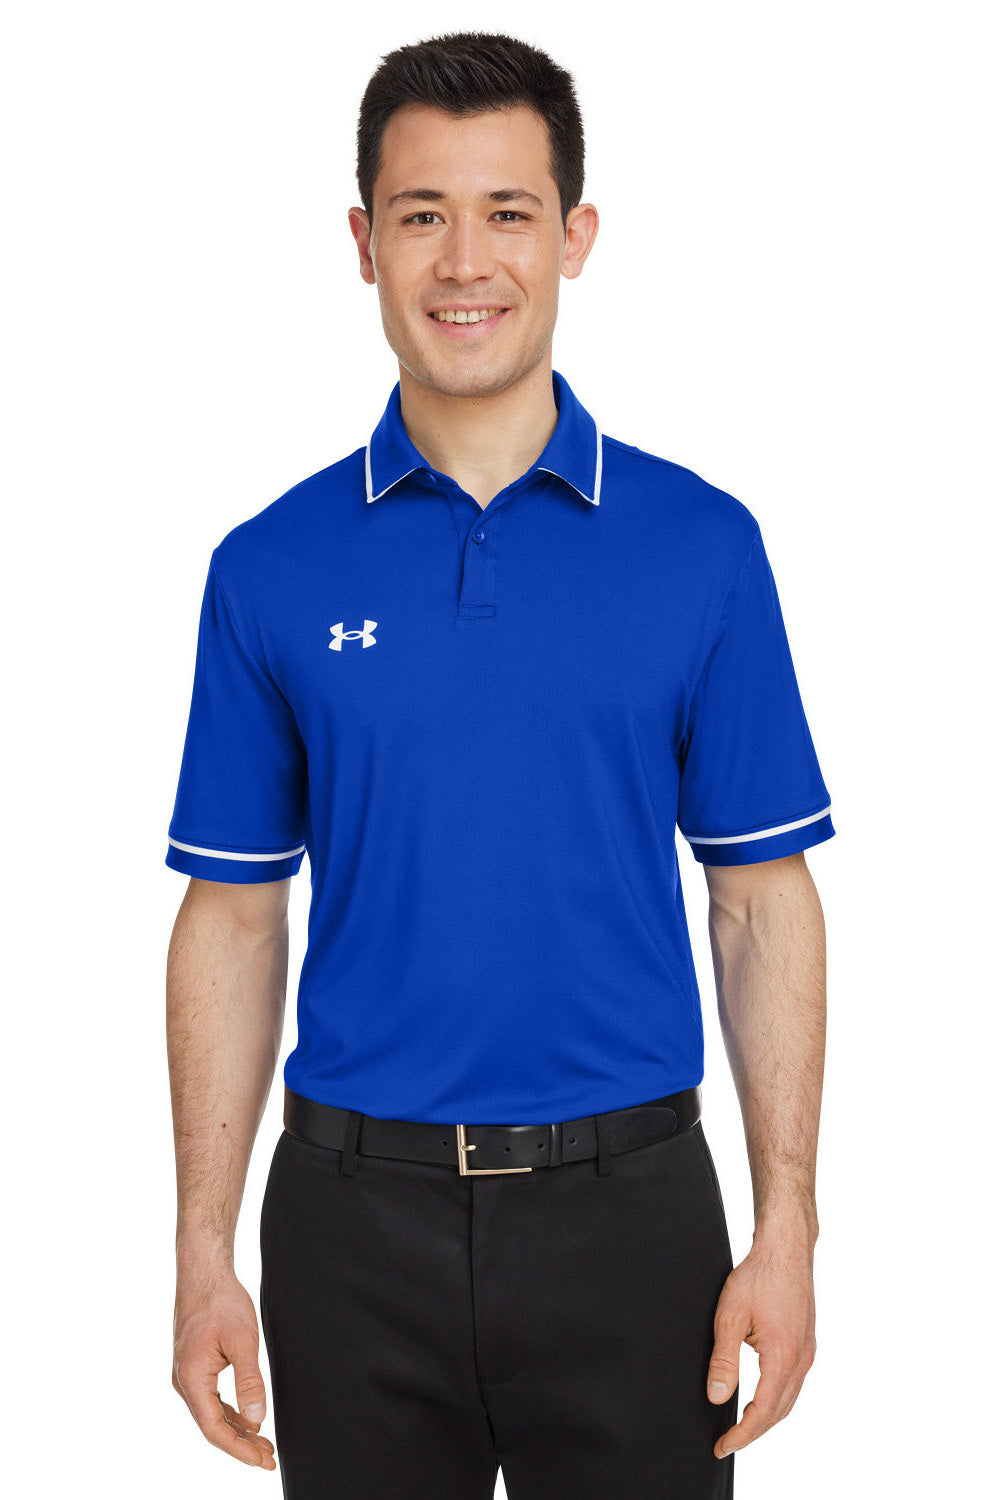 Under Armour 1376904 Mens Teams Performance Moisture Wicking Short Sleeve Polo Shirt Royal Blue Model Front